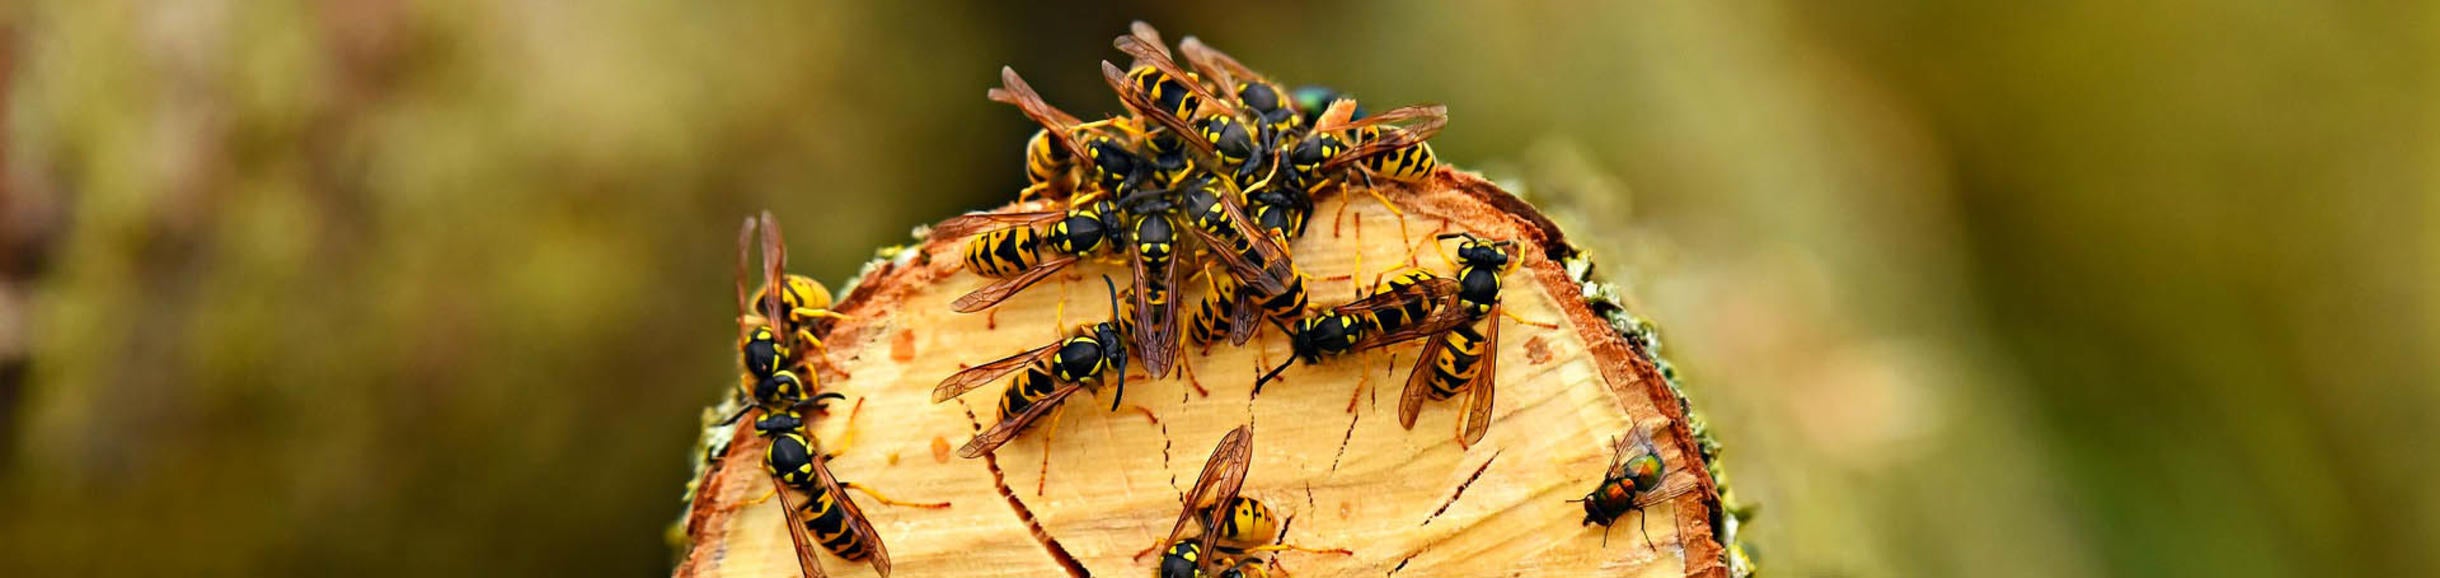 Yellowjacket wasps on tree stem, Image by Mabel Amber from Pixabay